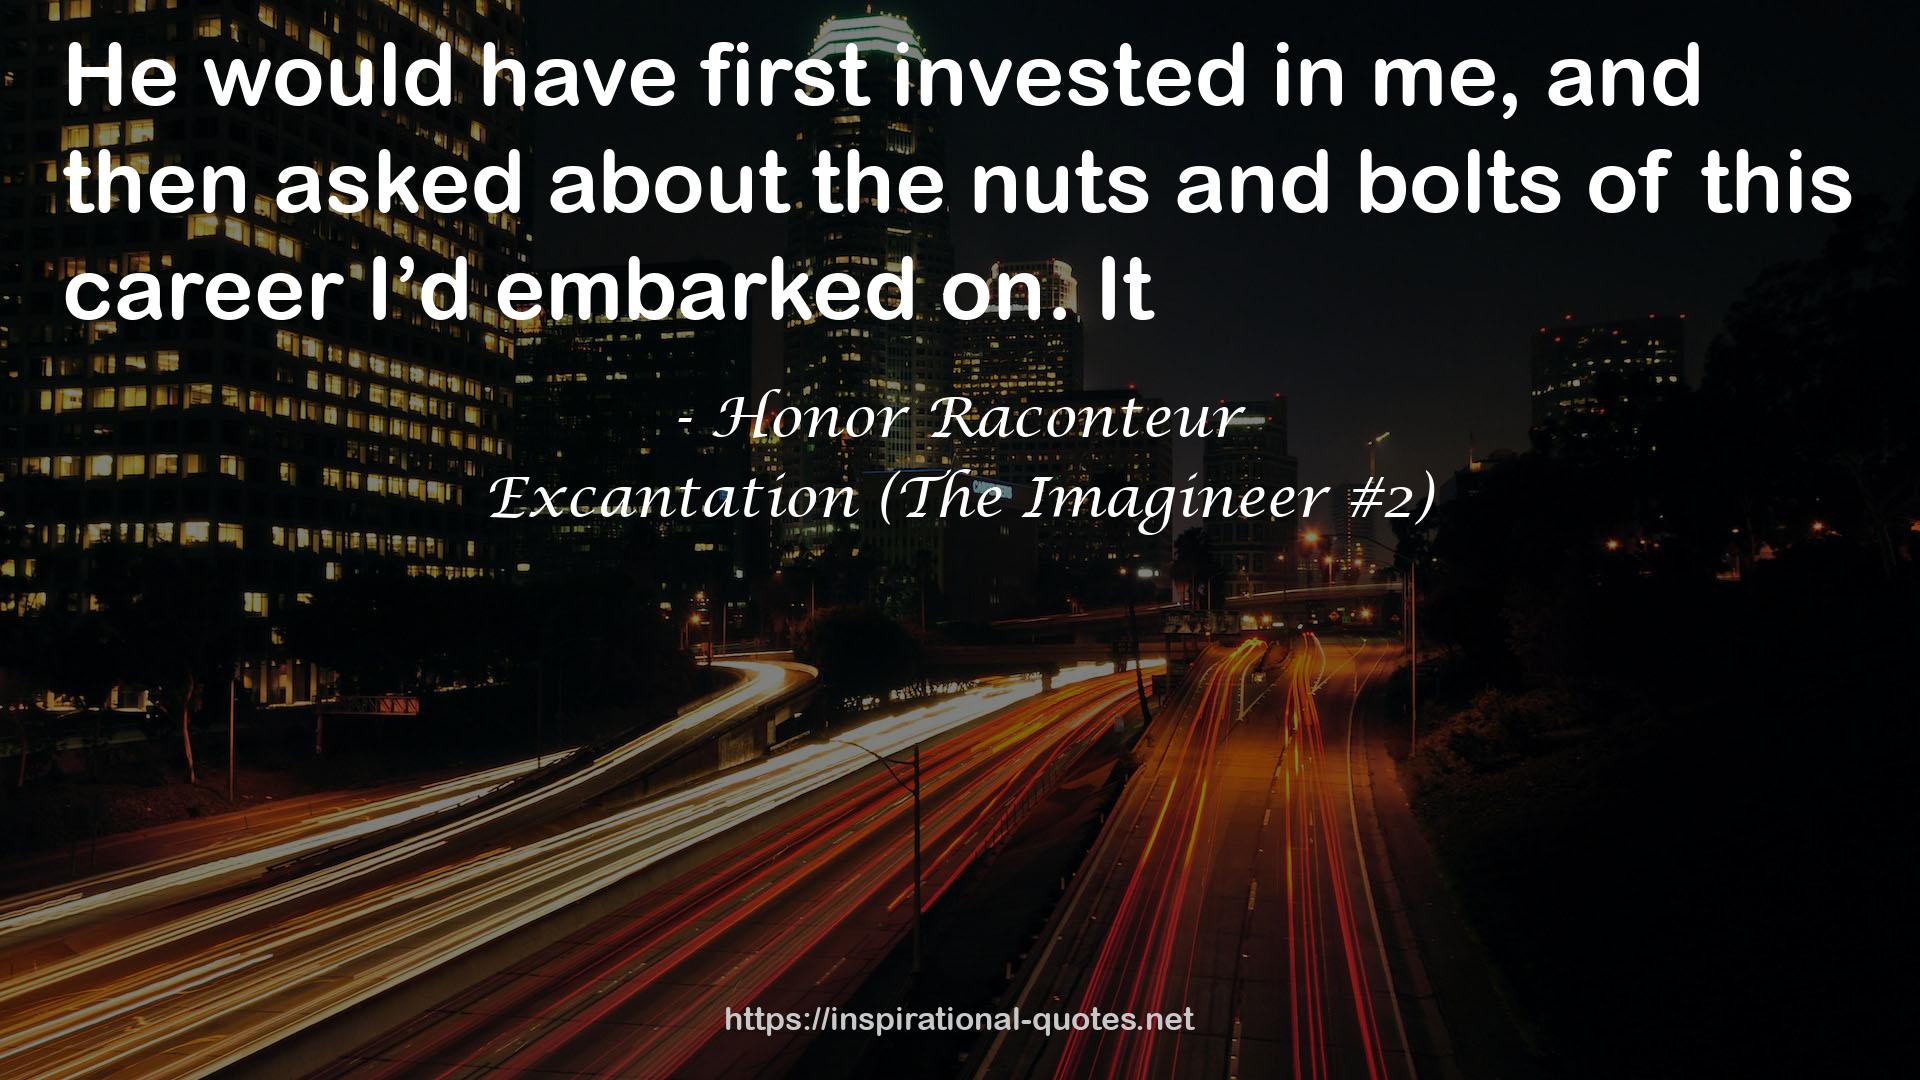 Excantation (The Imagineer #2) QUOTES